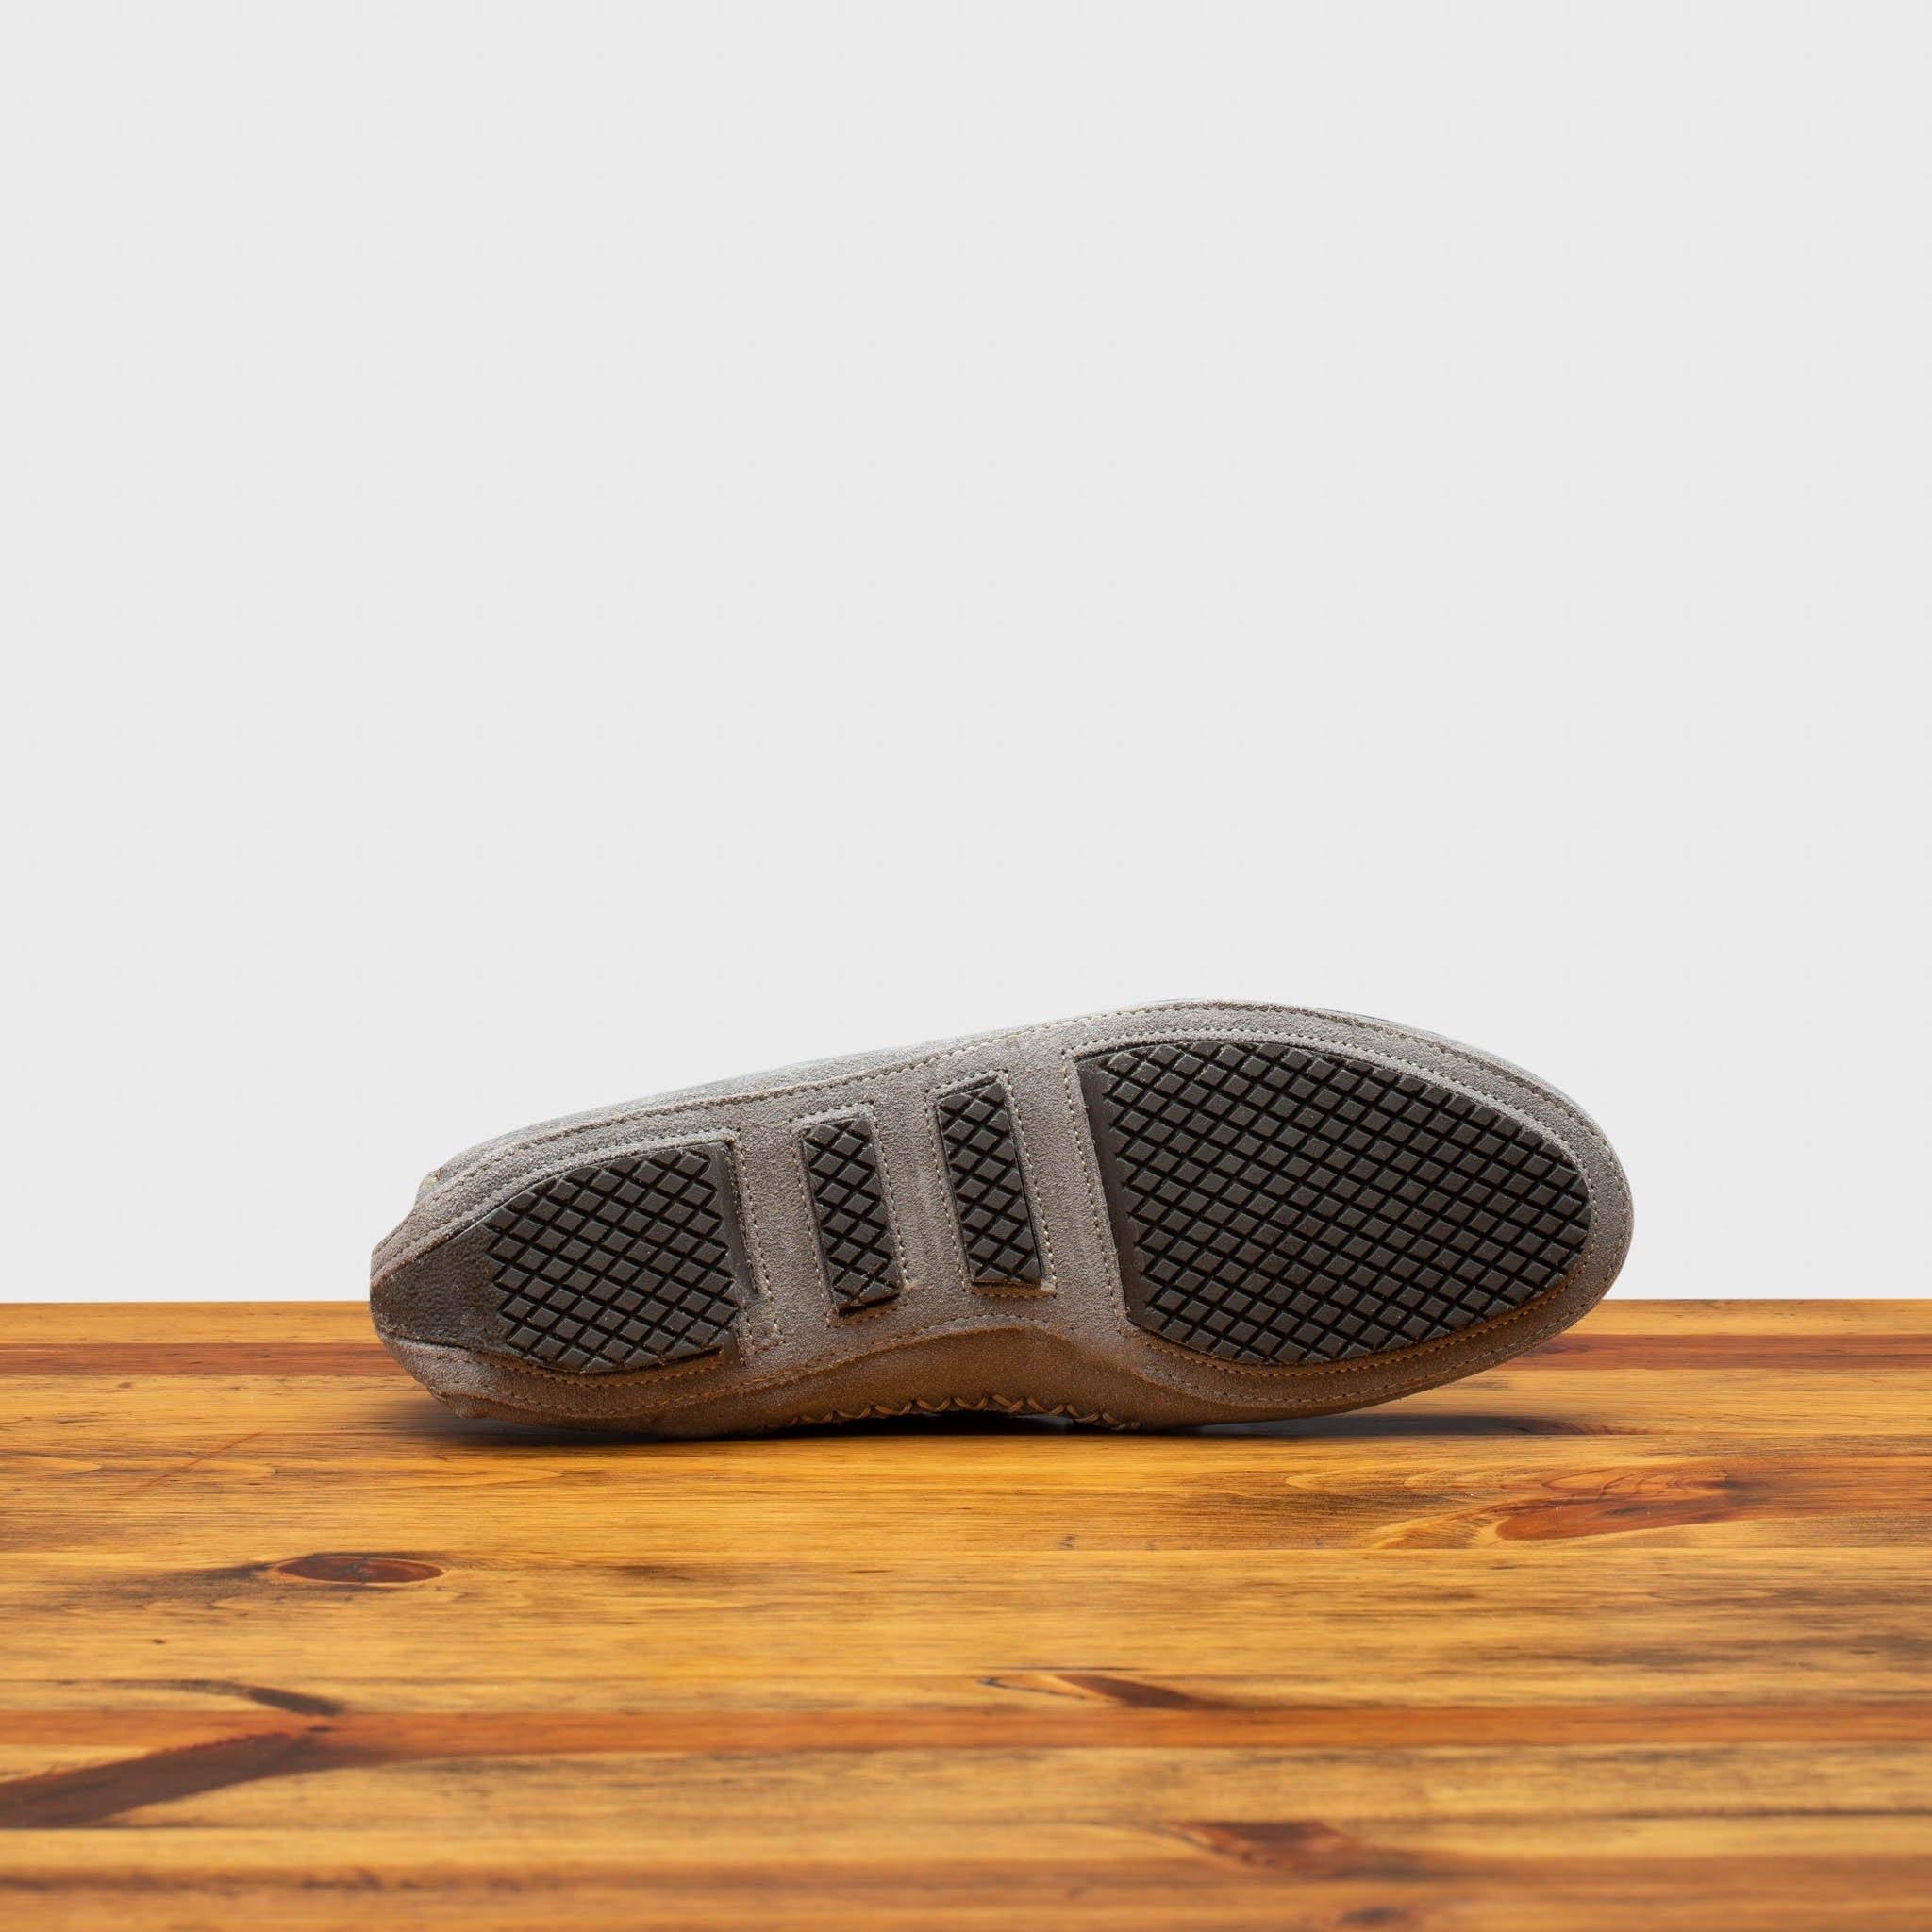 Rubber Outsole of 8976 Calzoleria Toscana Light Grey Suede Driver on top of a wooden table